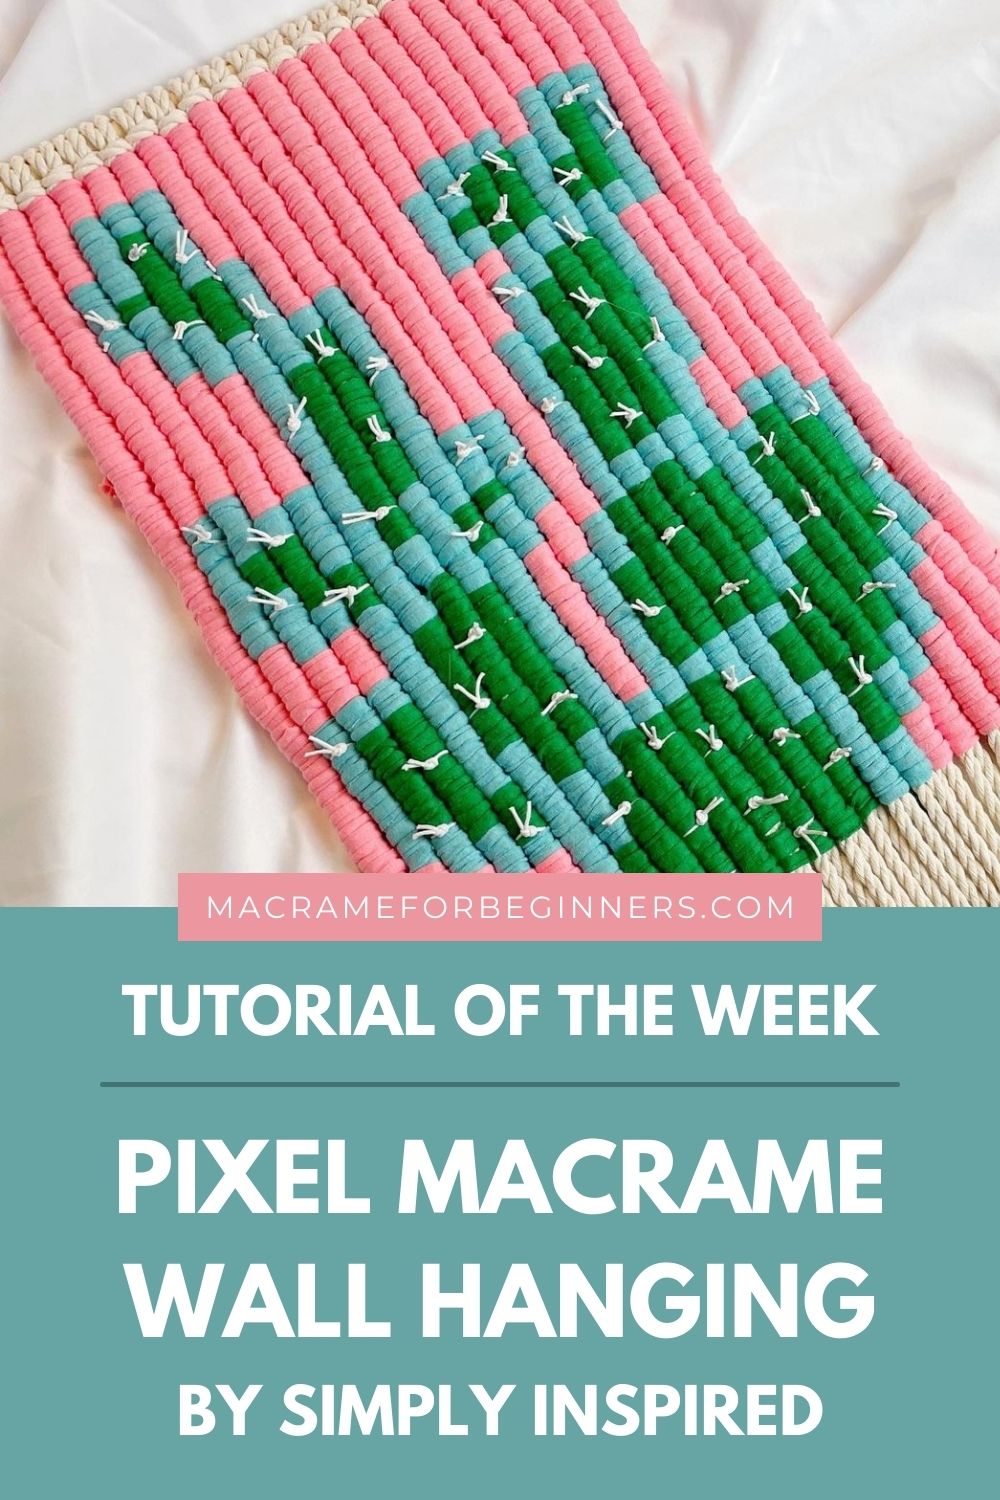 Easy Pixel Macrame Cactus Wall Hanging by Simply Inspired - Macrame for Beginners